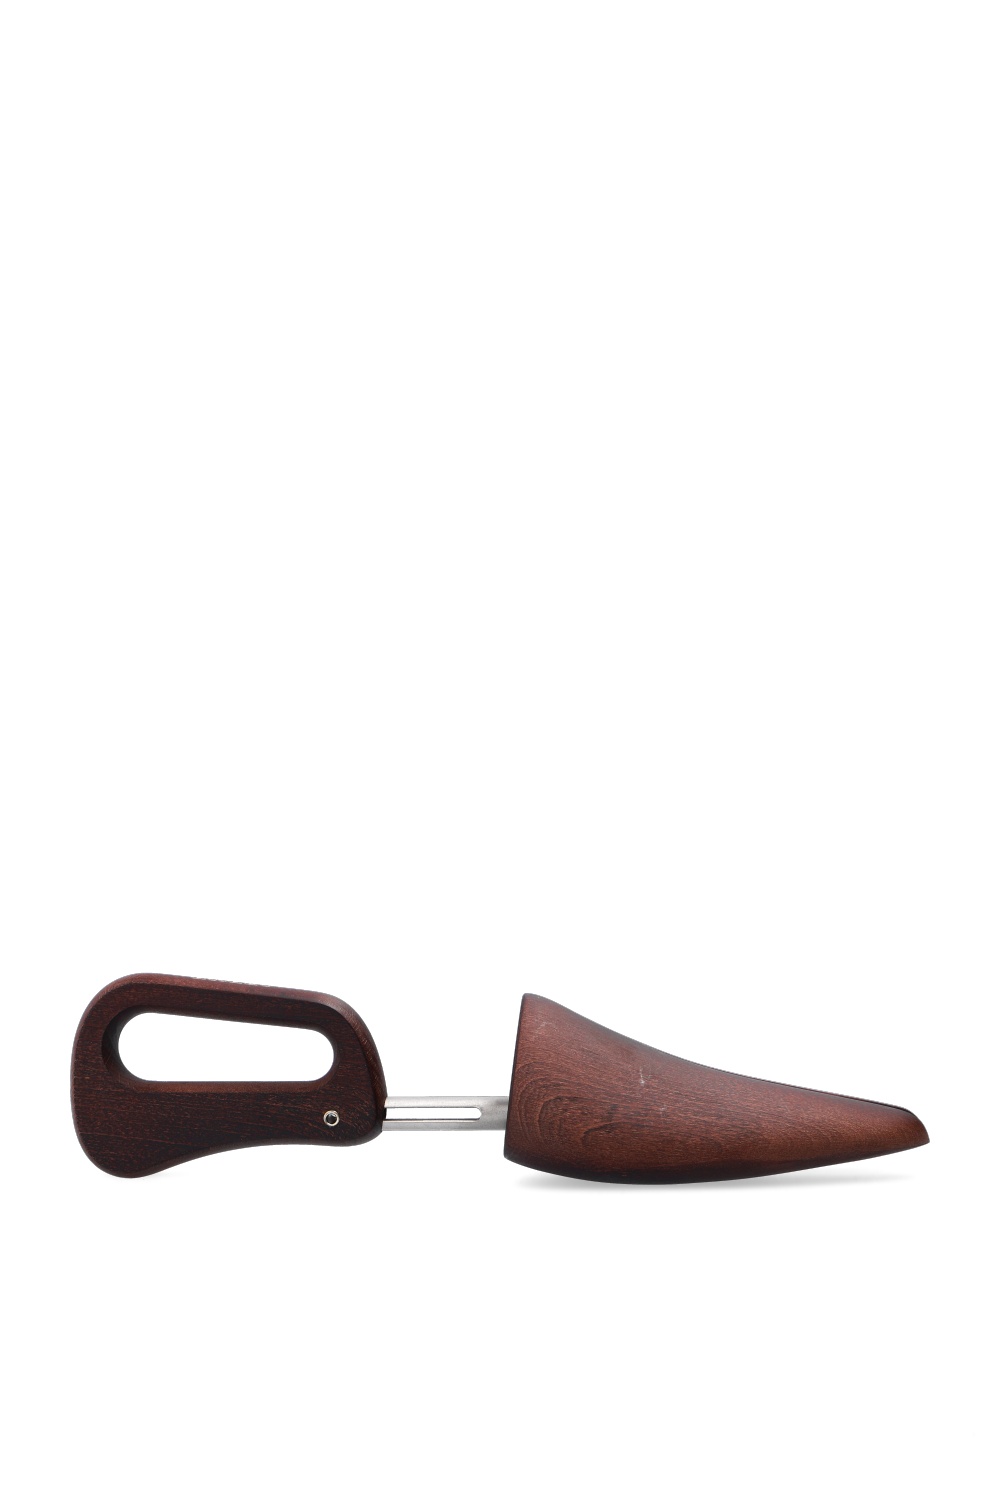 Bally Wood shoe Cosmo horns with logo